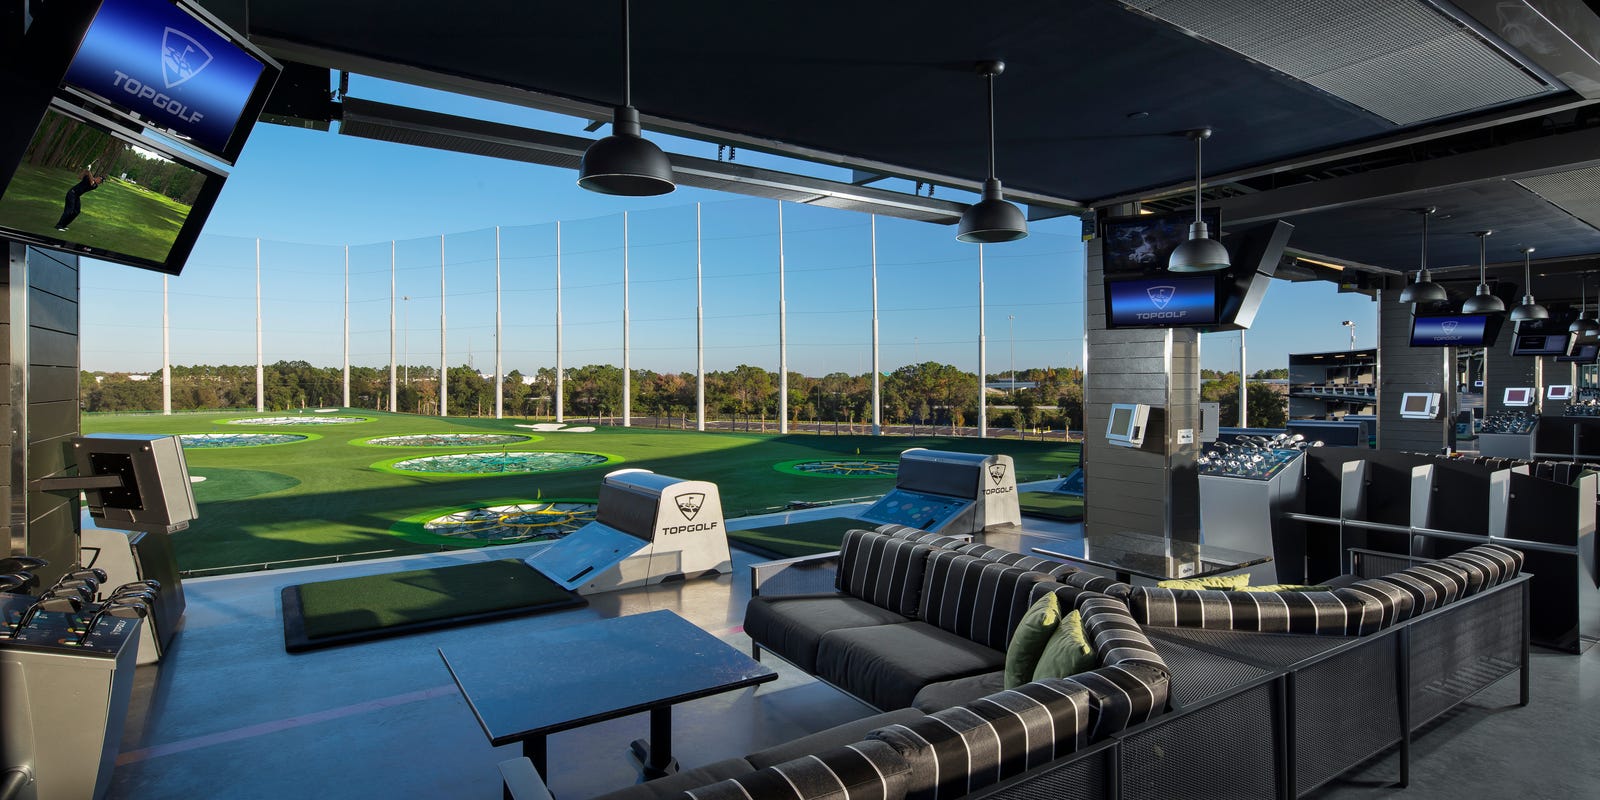 Fort Myers Topgolf Expected To Make Debut Next Spring